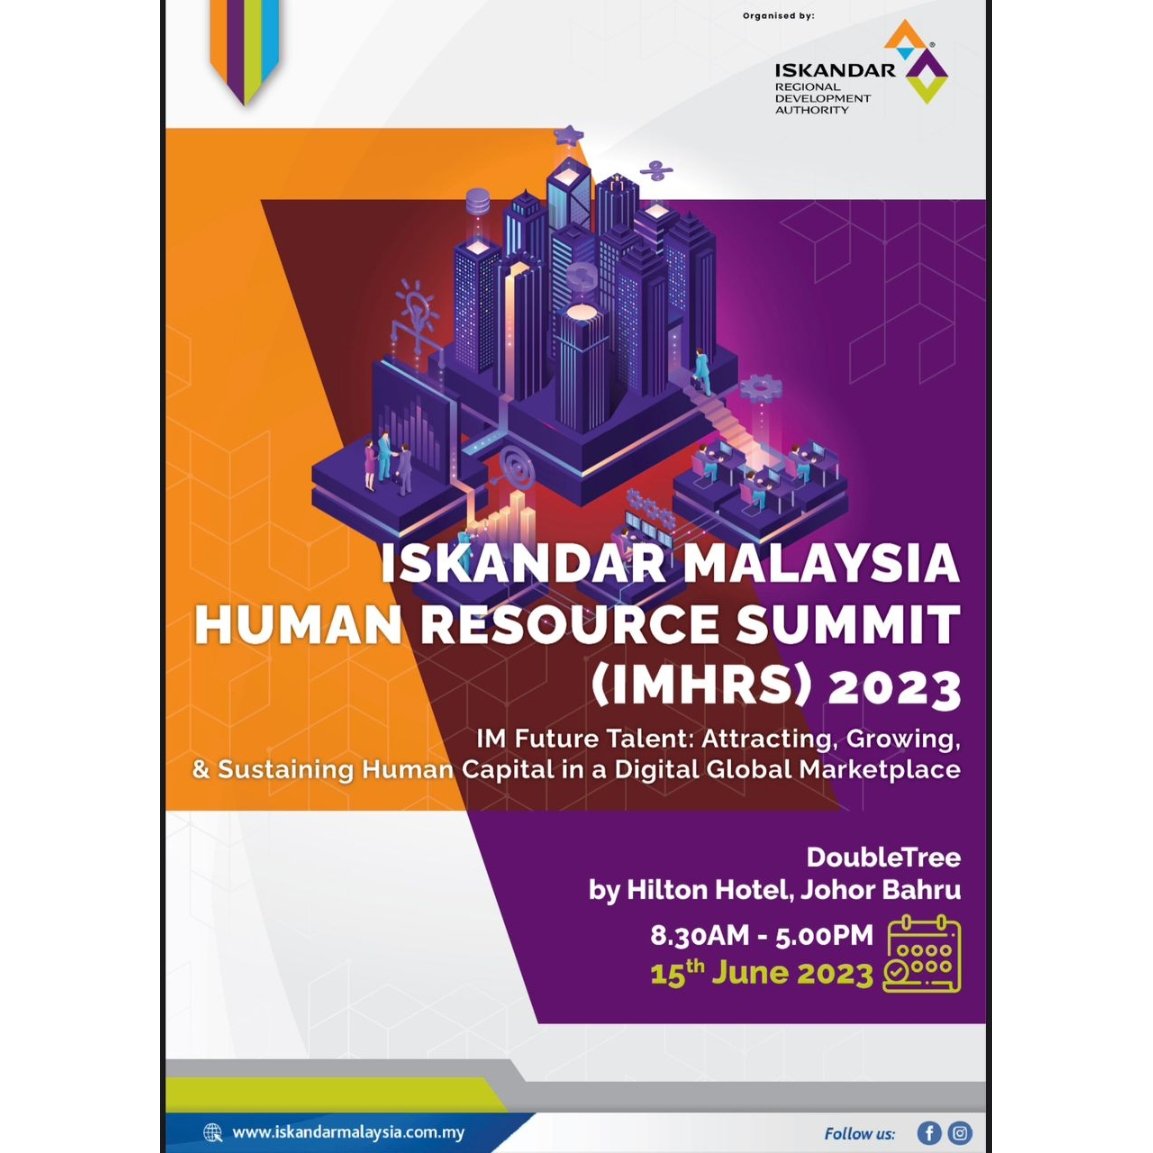 Iskandar Malaysia Human Resource Summit 2023 (IMHRS-2023)

Date: 15th June 2023 (Thursday)
Time: 8.30am to 5.00pm
Venue: Doubletree by Hilton Johor Bahru

To confirm your attendance and reserve your spot, please RSVP using the following link: 

app.inistate.com/#/share/WPIYFk…